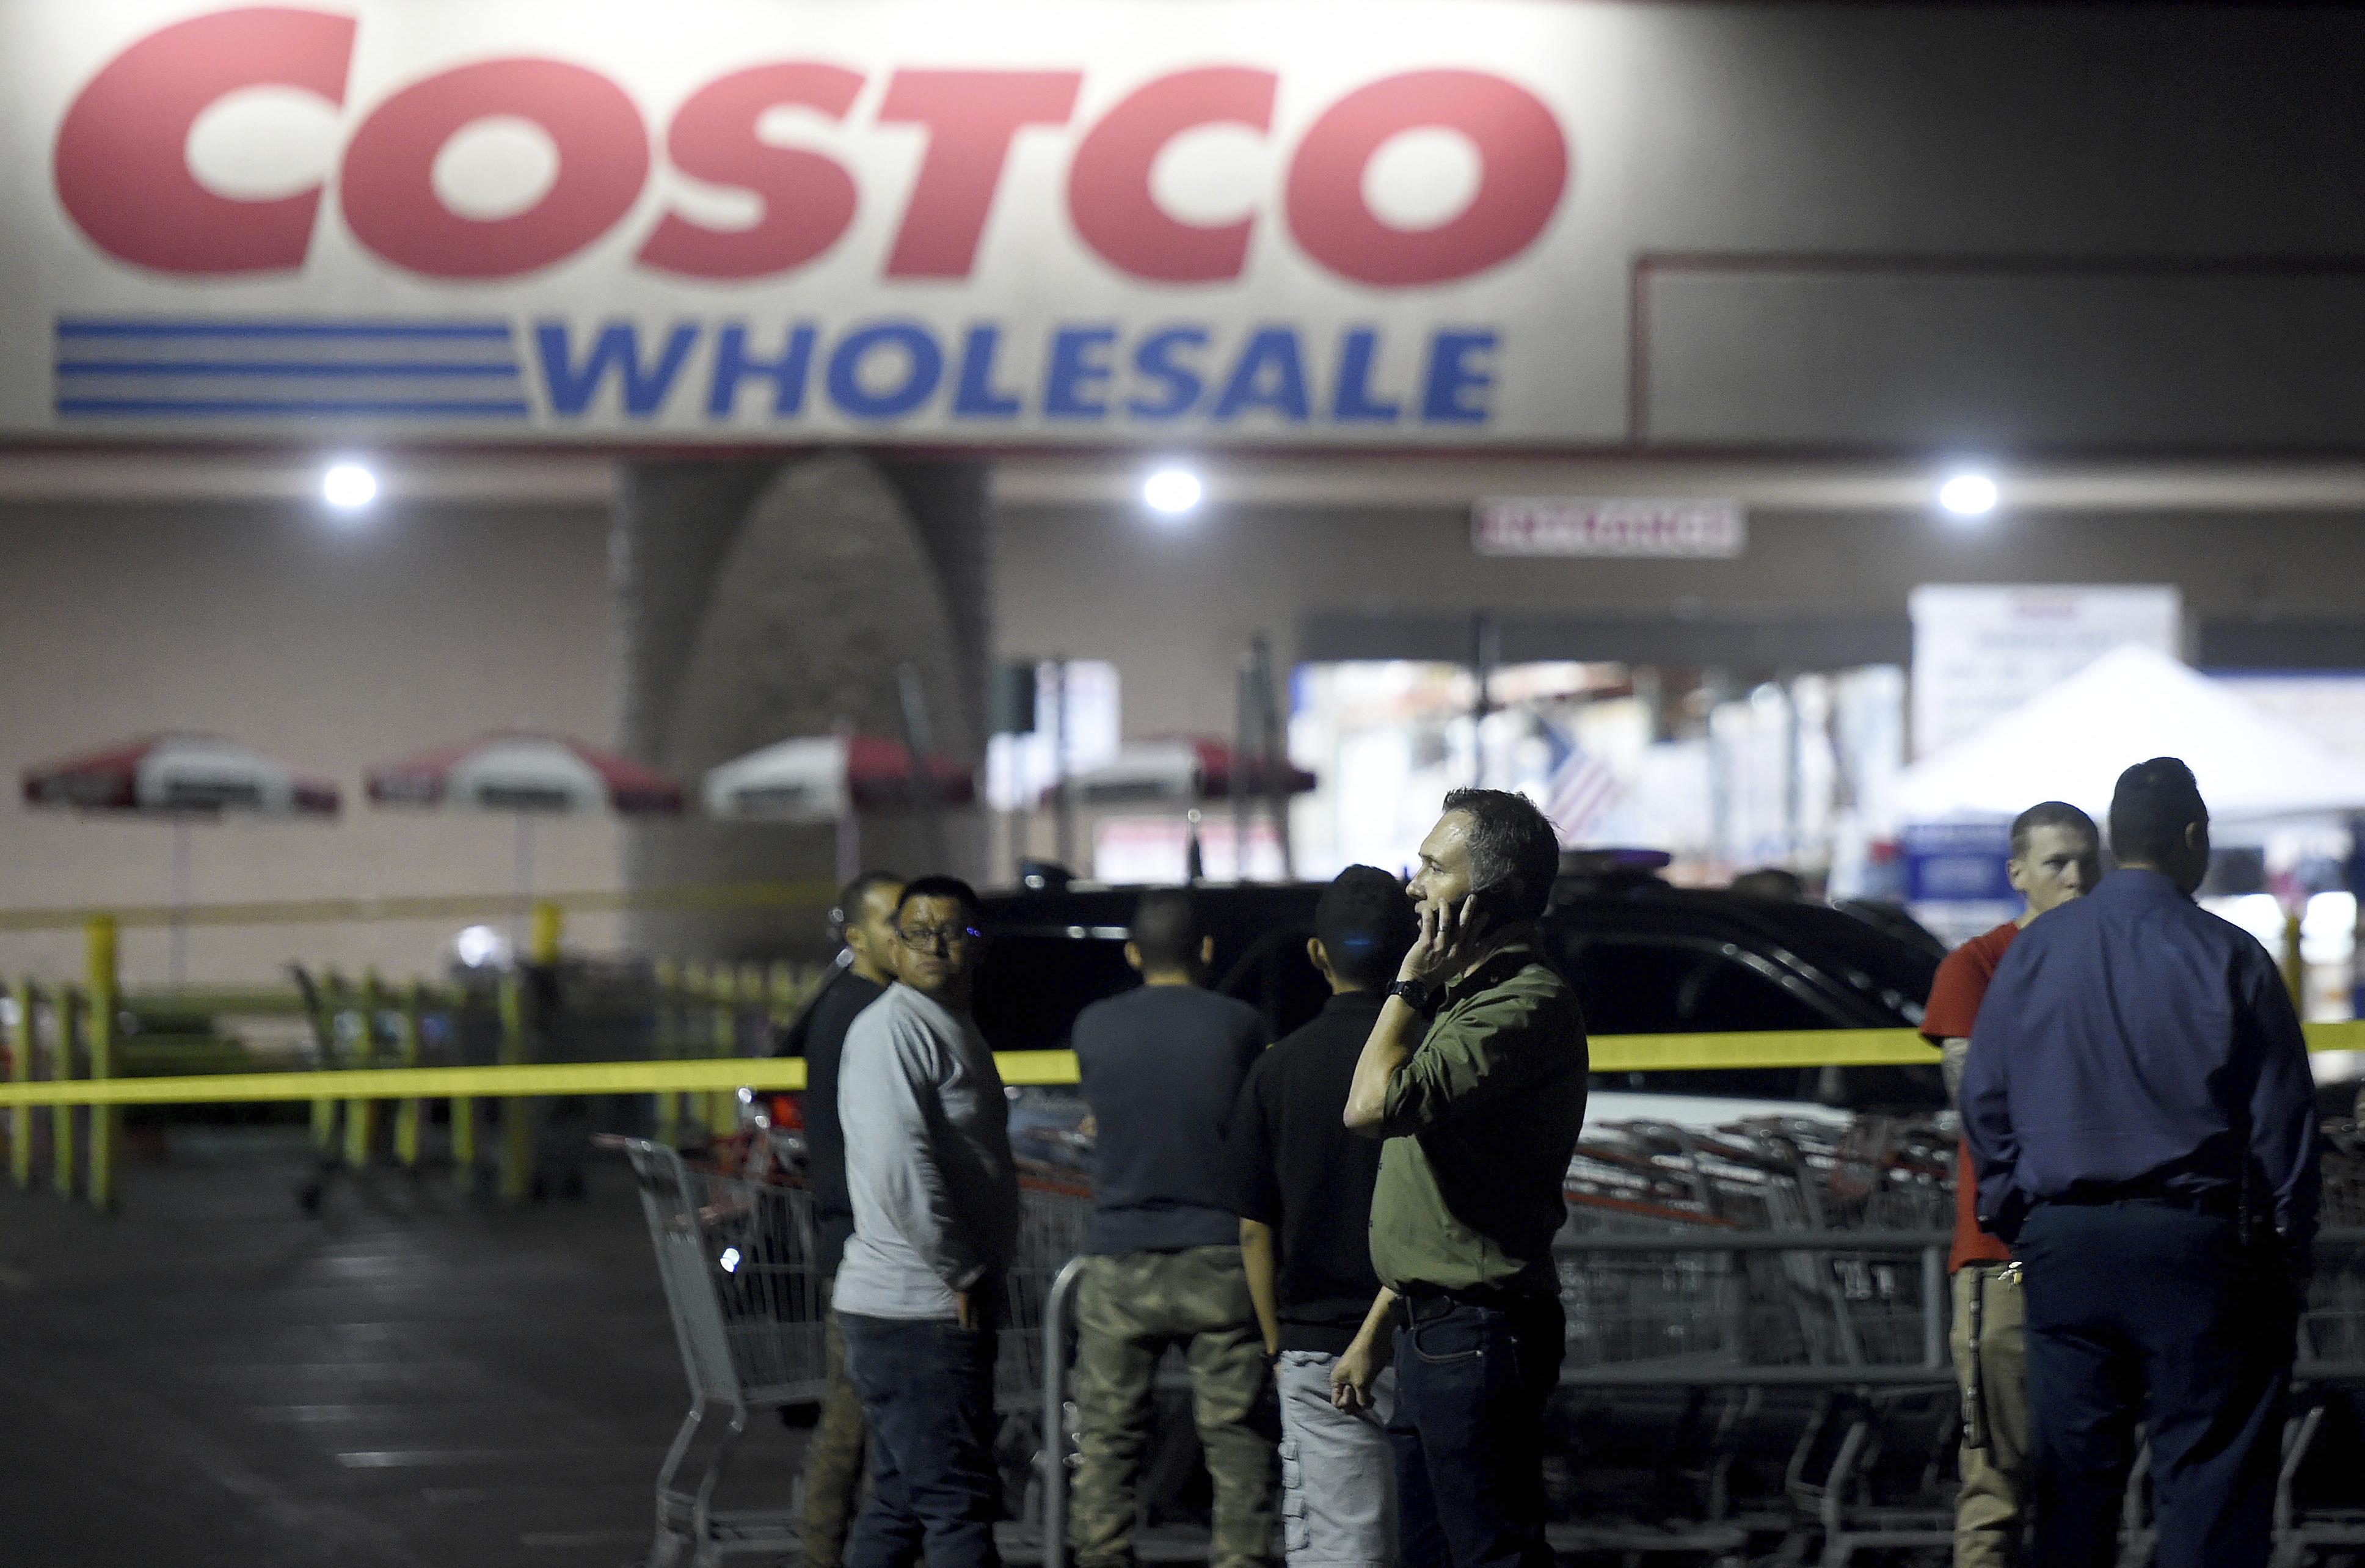 Attorney Officer Attacked Without Warning In Costco The Spokesman Review 